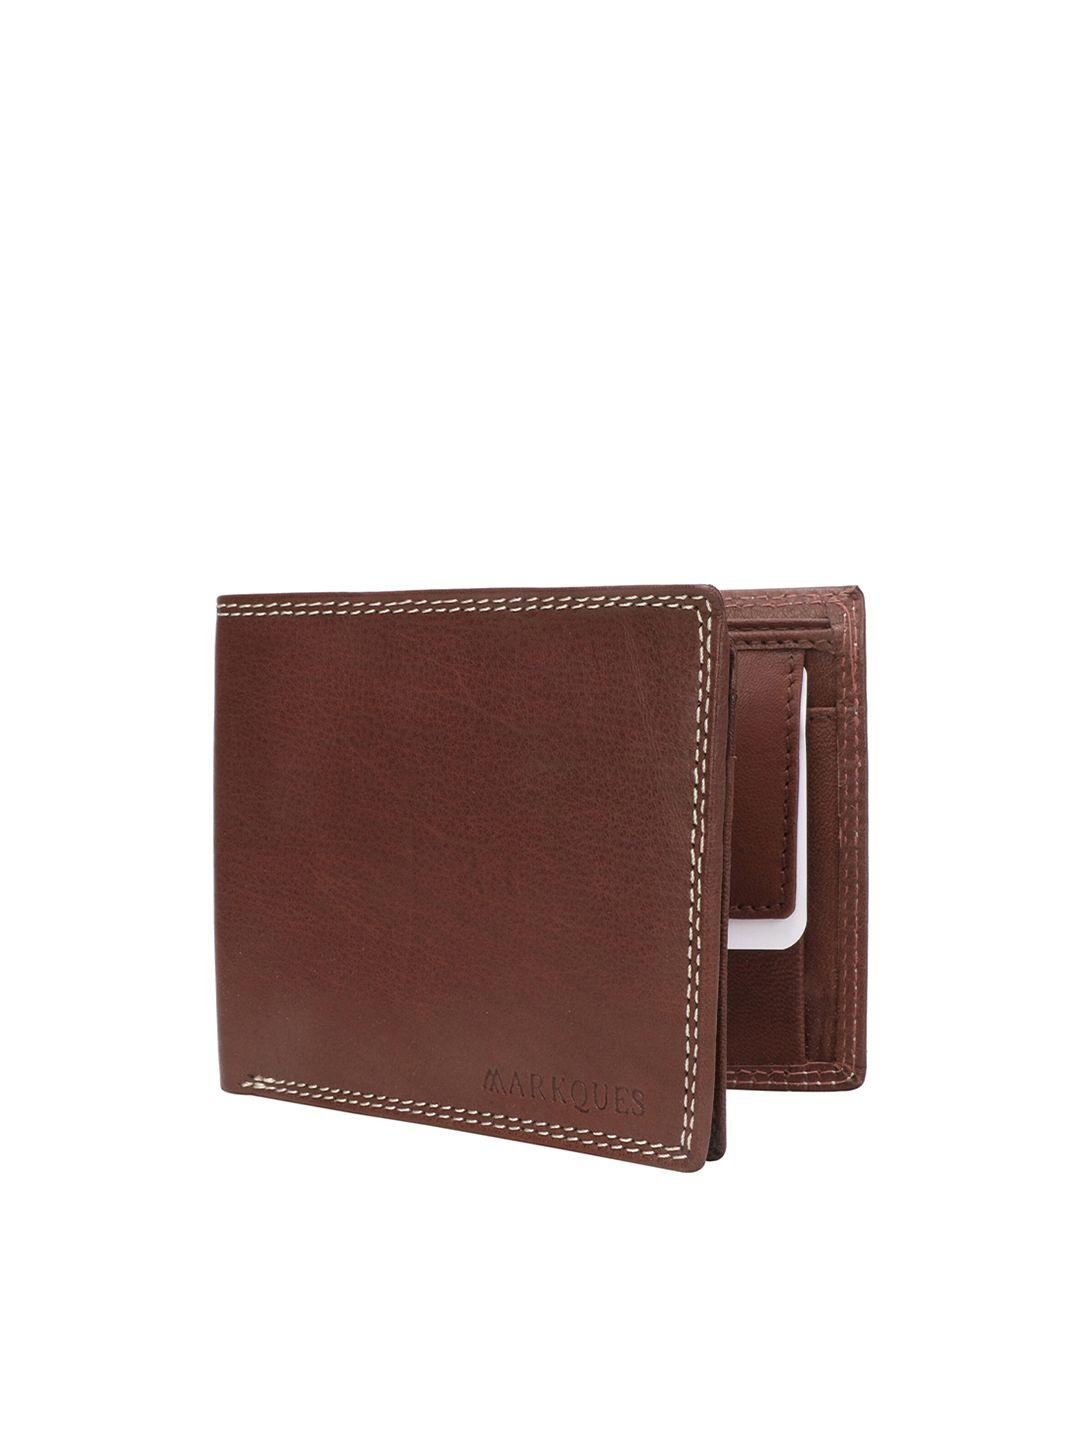 markques men brown leather two fold wallet